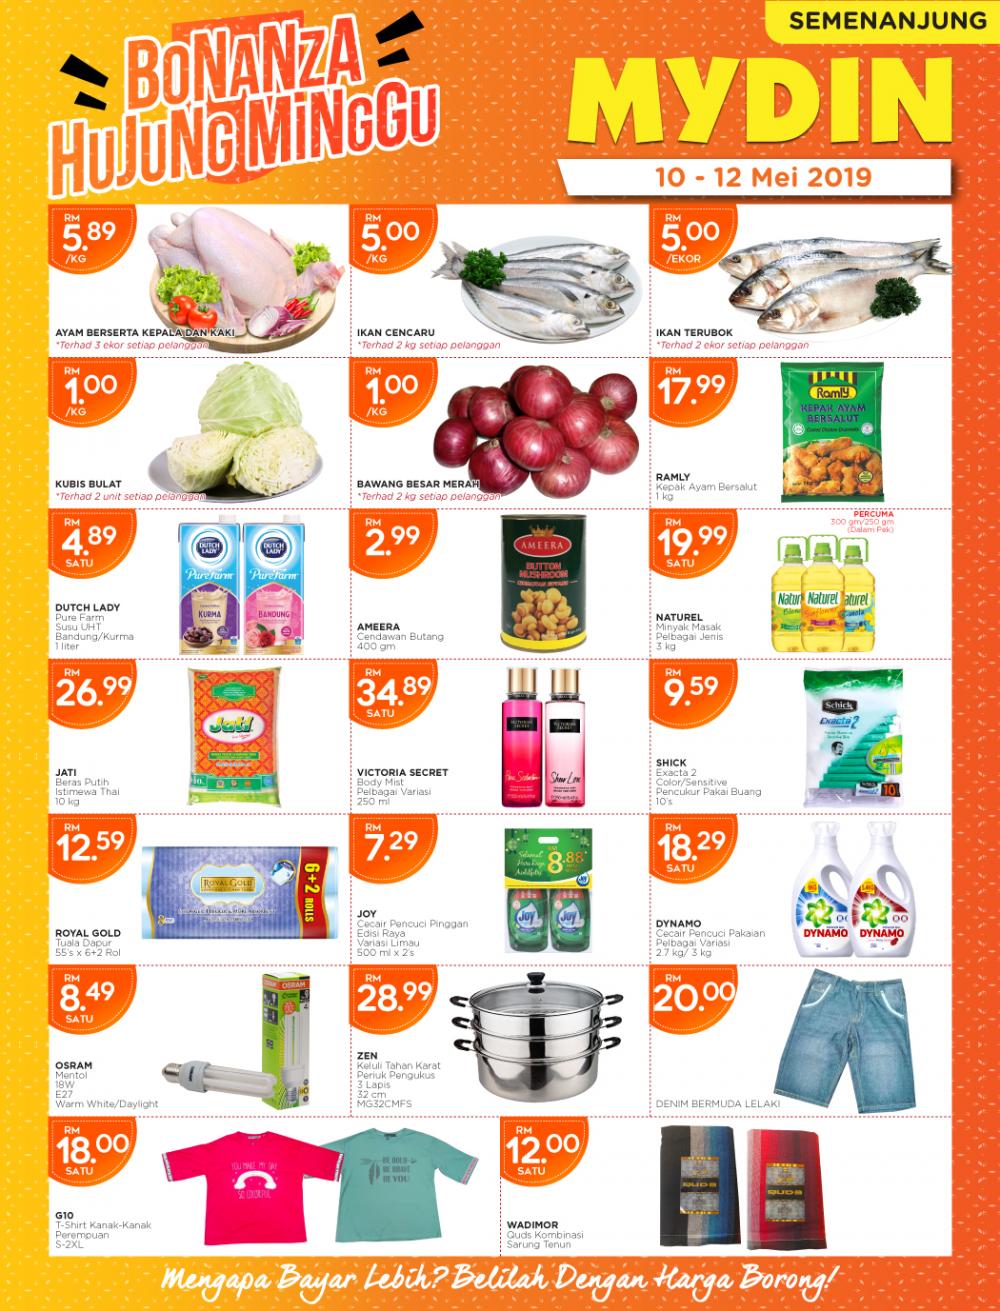 MYDIN Weekend Promotion (10 May 2019 - 12 May 2019)